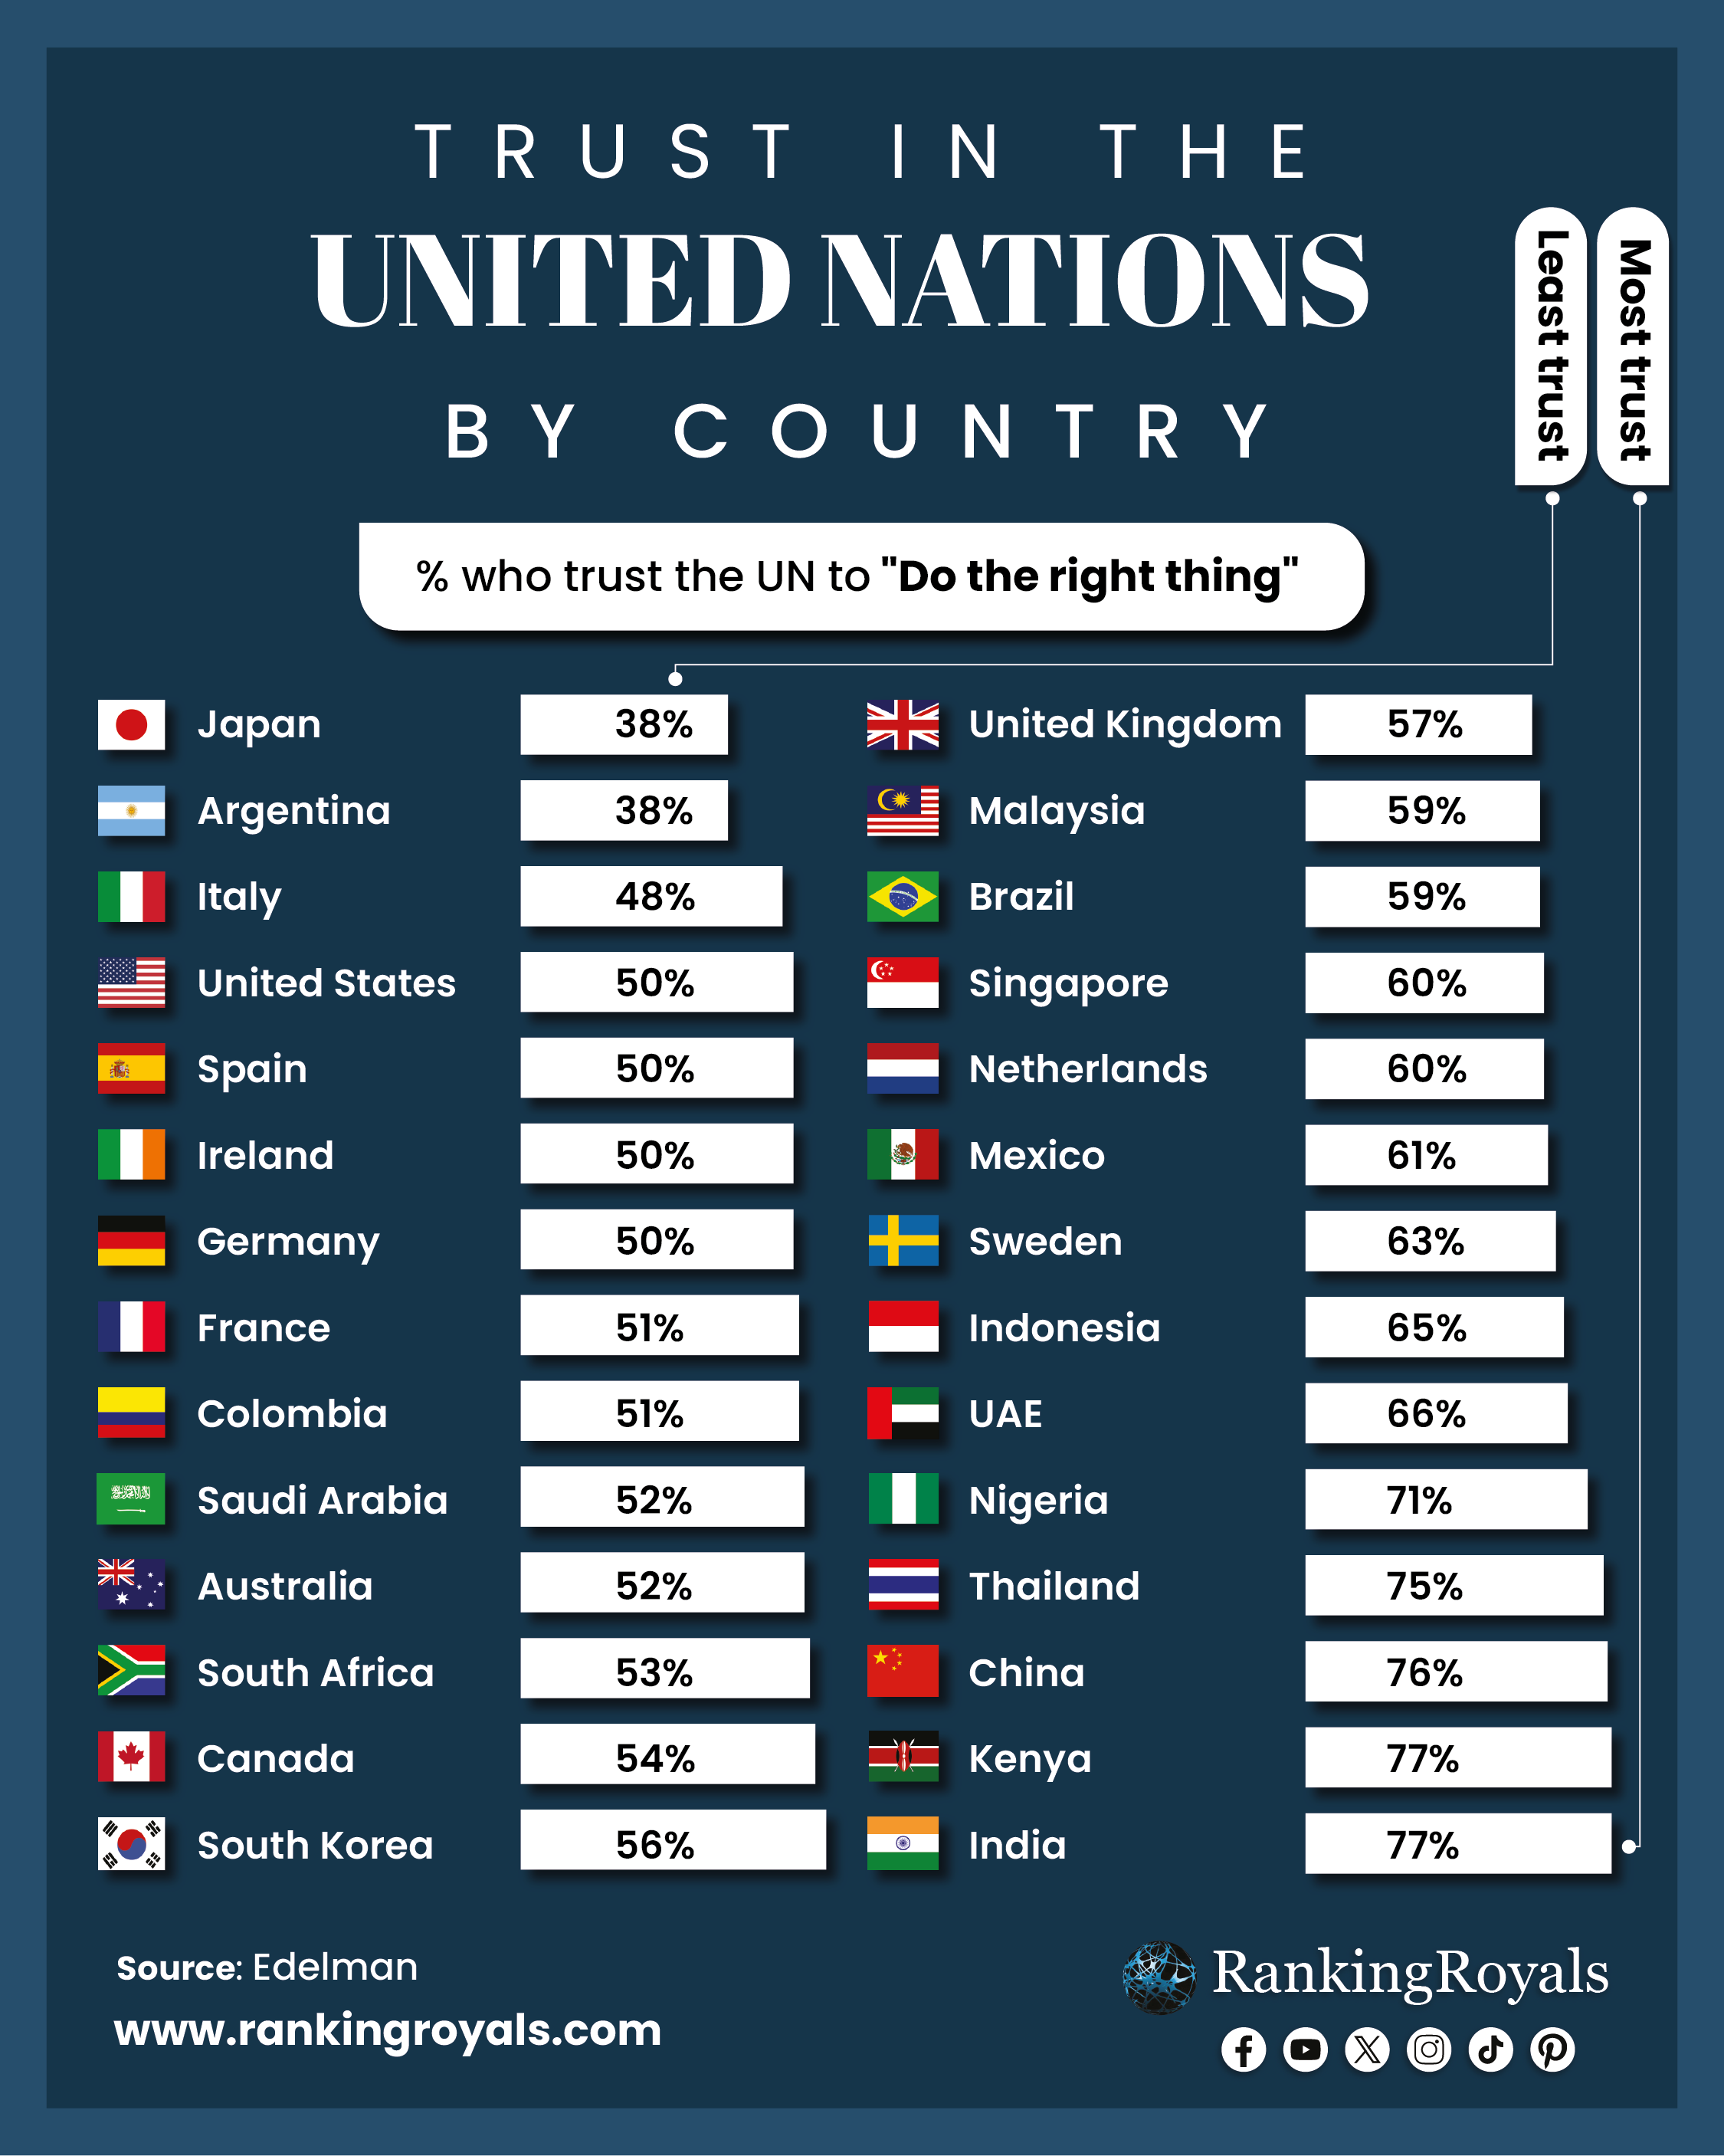 Trust in the United Nations (UN)